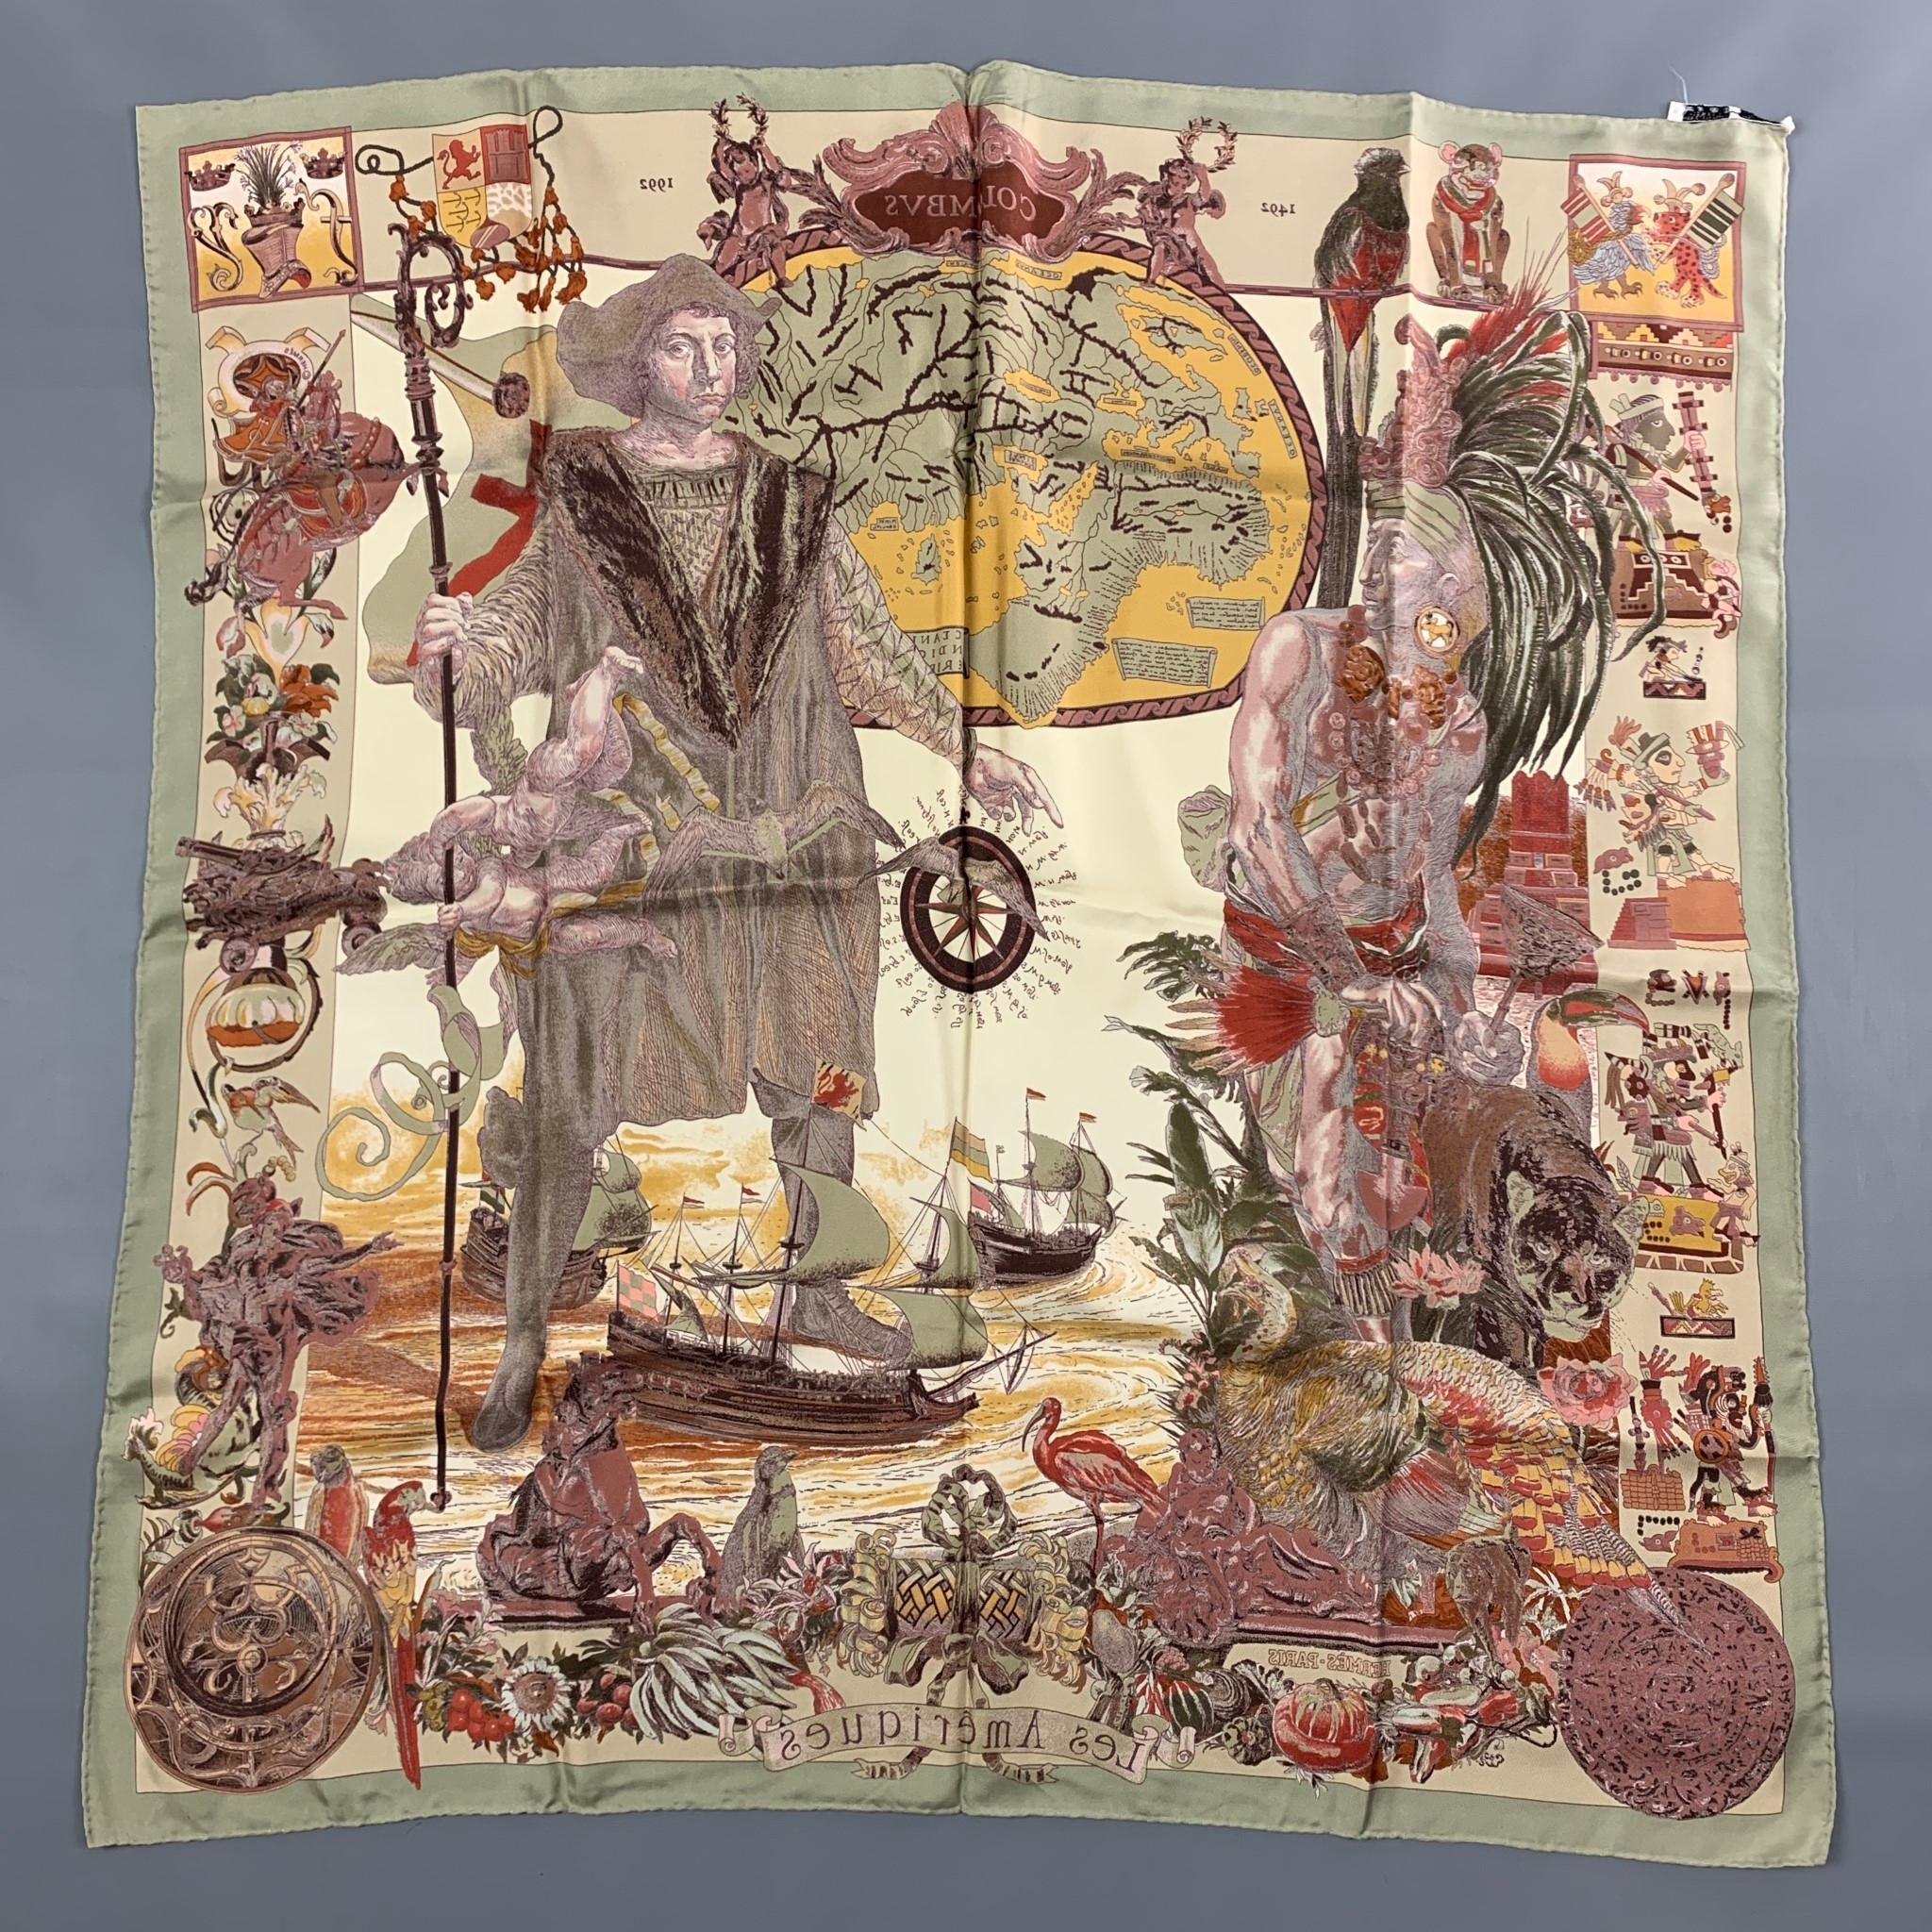 HERMES 'Les Ameriques' scarf comes in a brown & cream print silk featuring hand rolled edges. Includes box. Made in France. 

Very Good Pre-Owned Condition.

Measurements:

35 in. x 35 in. 